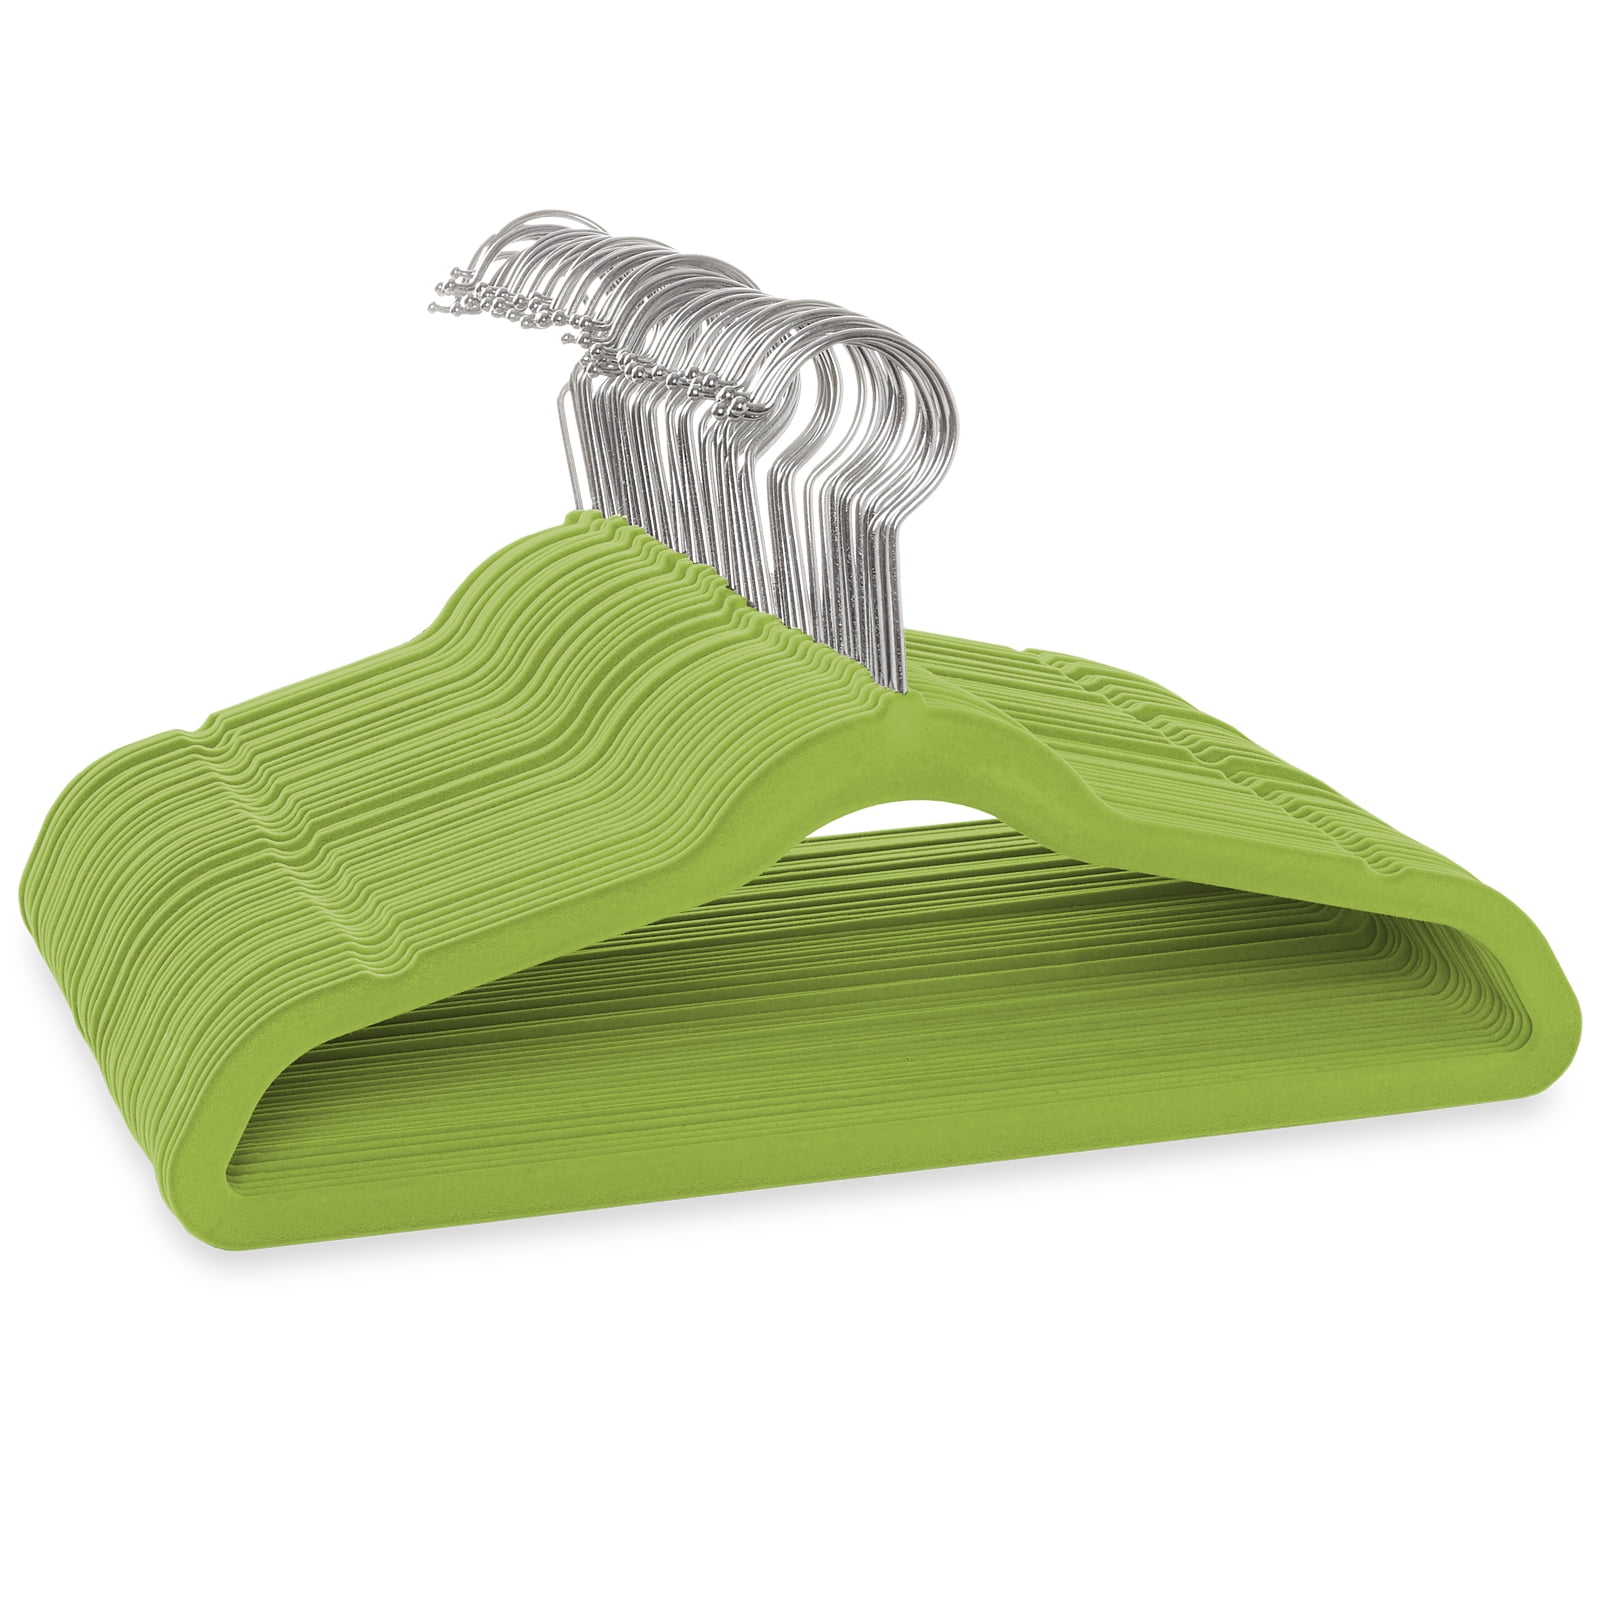 r e ) x Eco-Friendly Hangers - Sustainable Clothing Hangers, Kids, 14 Pack,  Mu